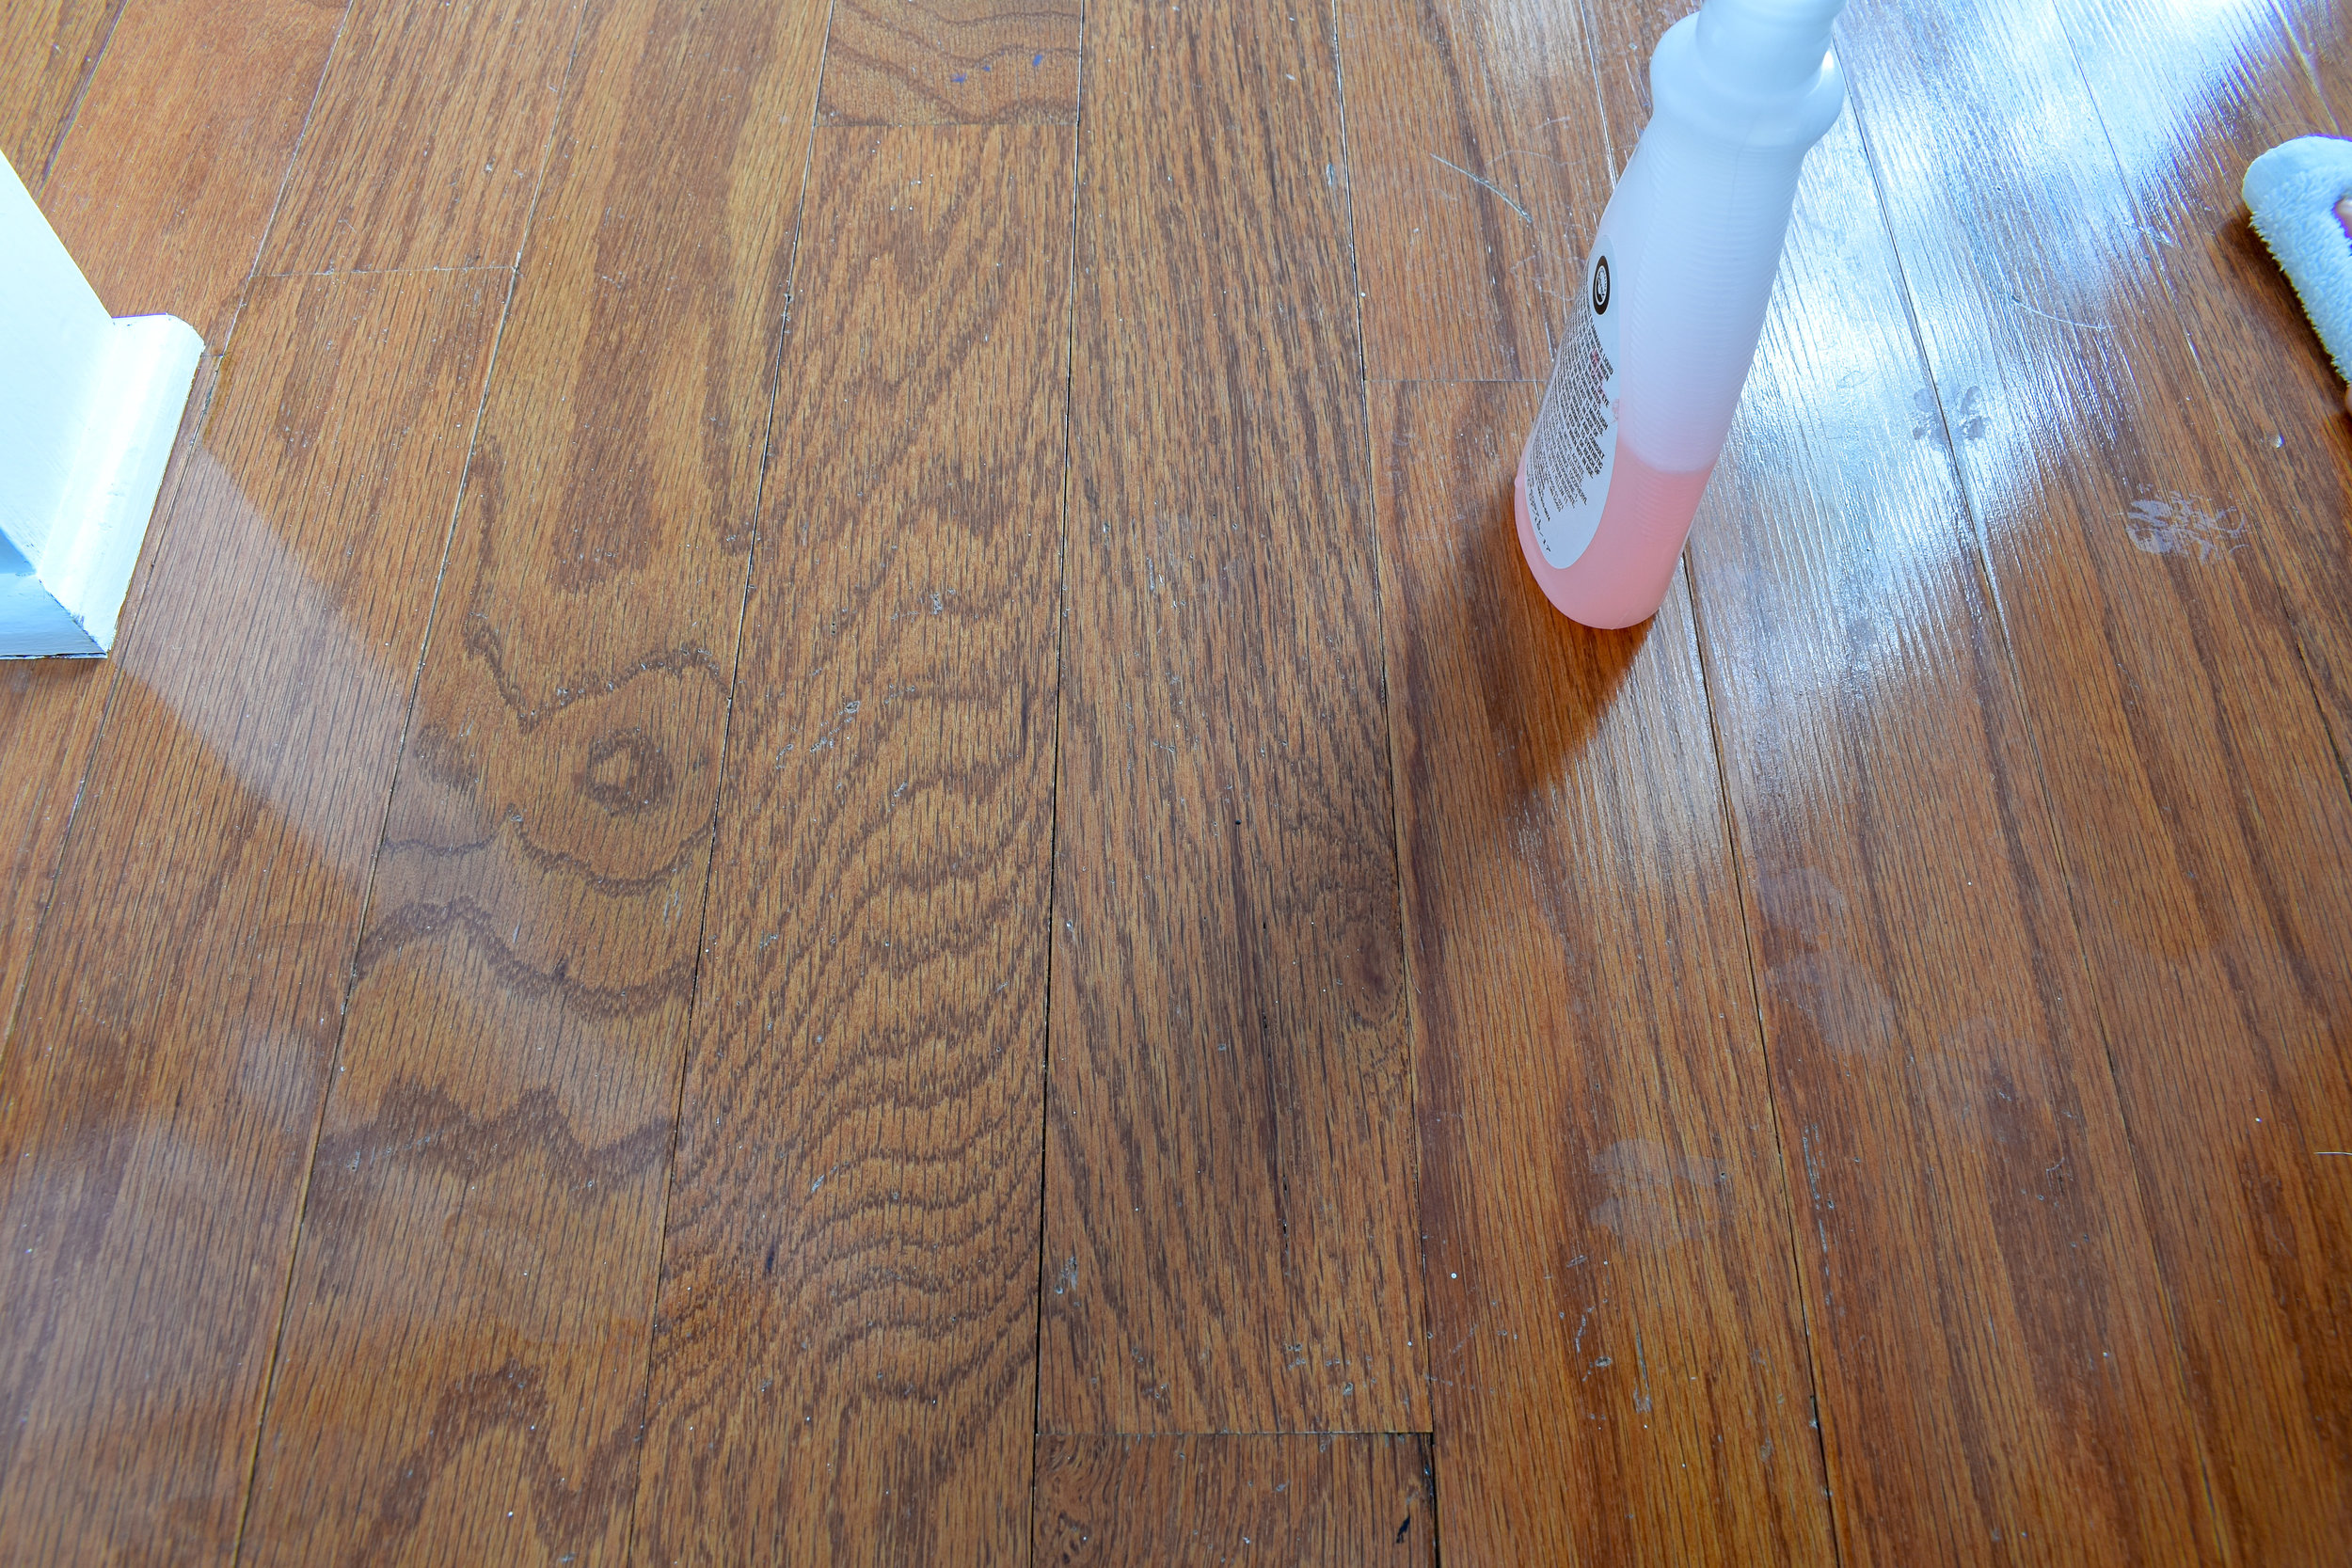 How To Make Old Hardwood Floors Shine, Remove Old Paint From Hardwood Floors